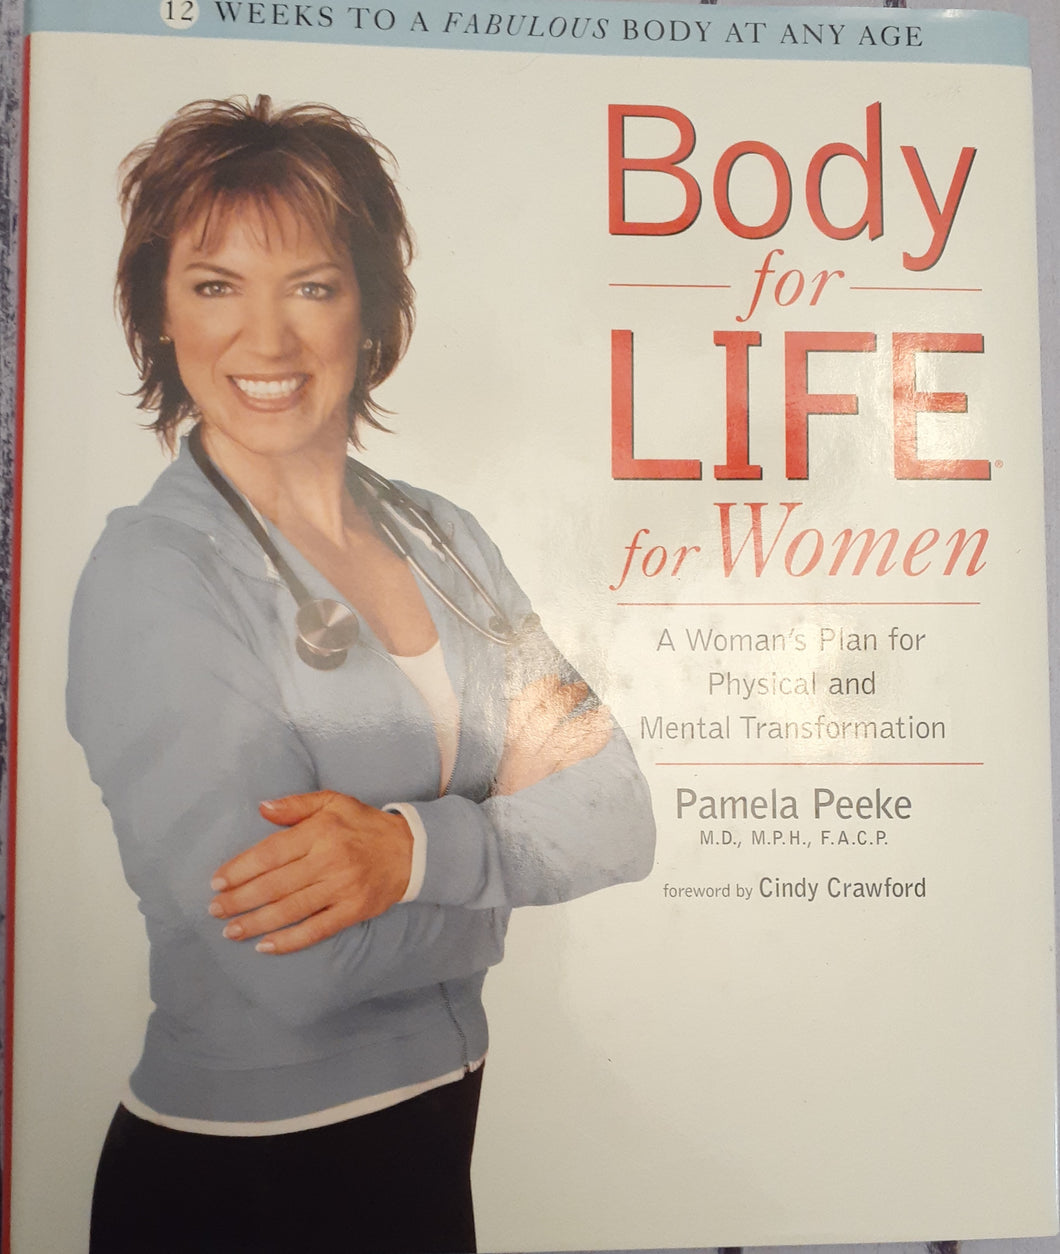 Body-for-Life for Women - A Woman's Plan for Physical and Mental Transformation